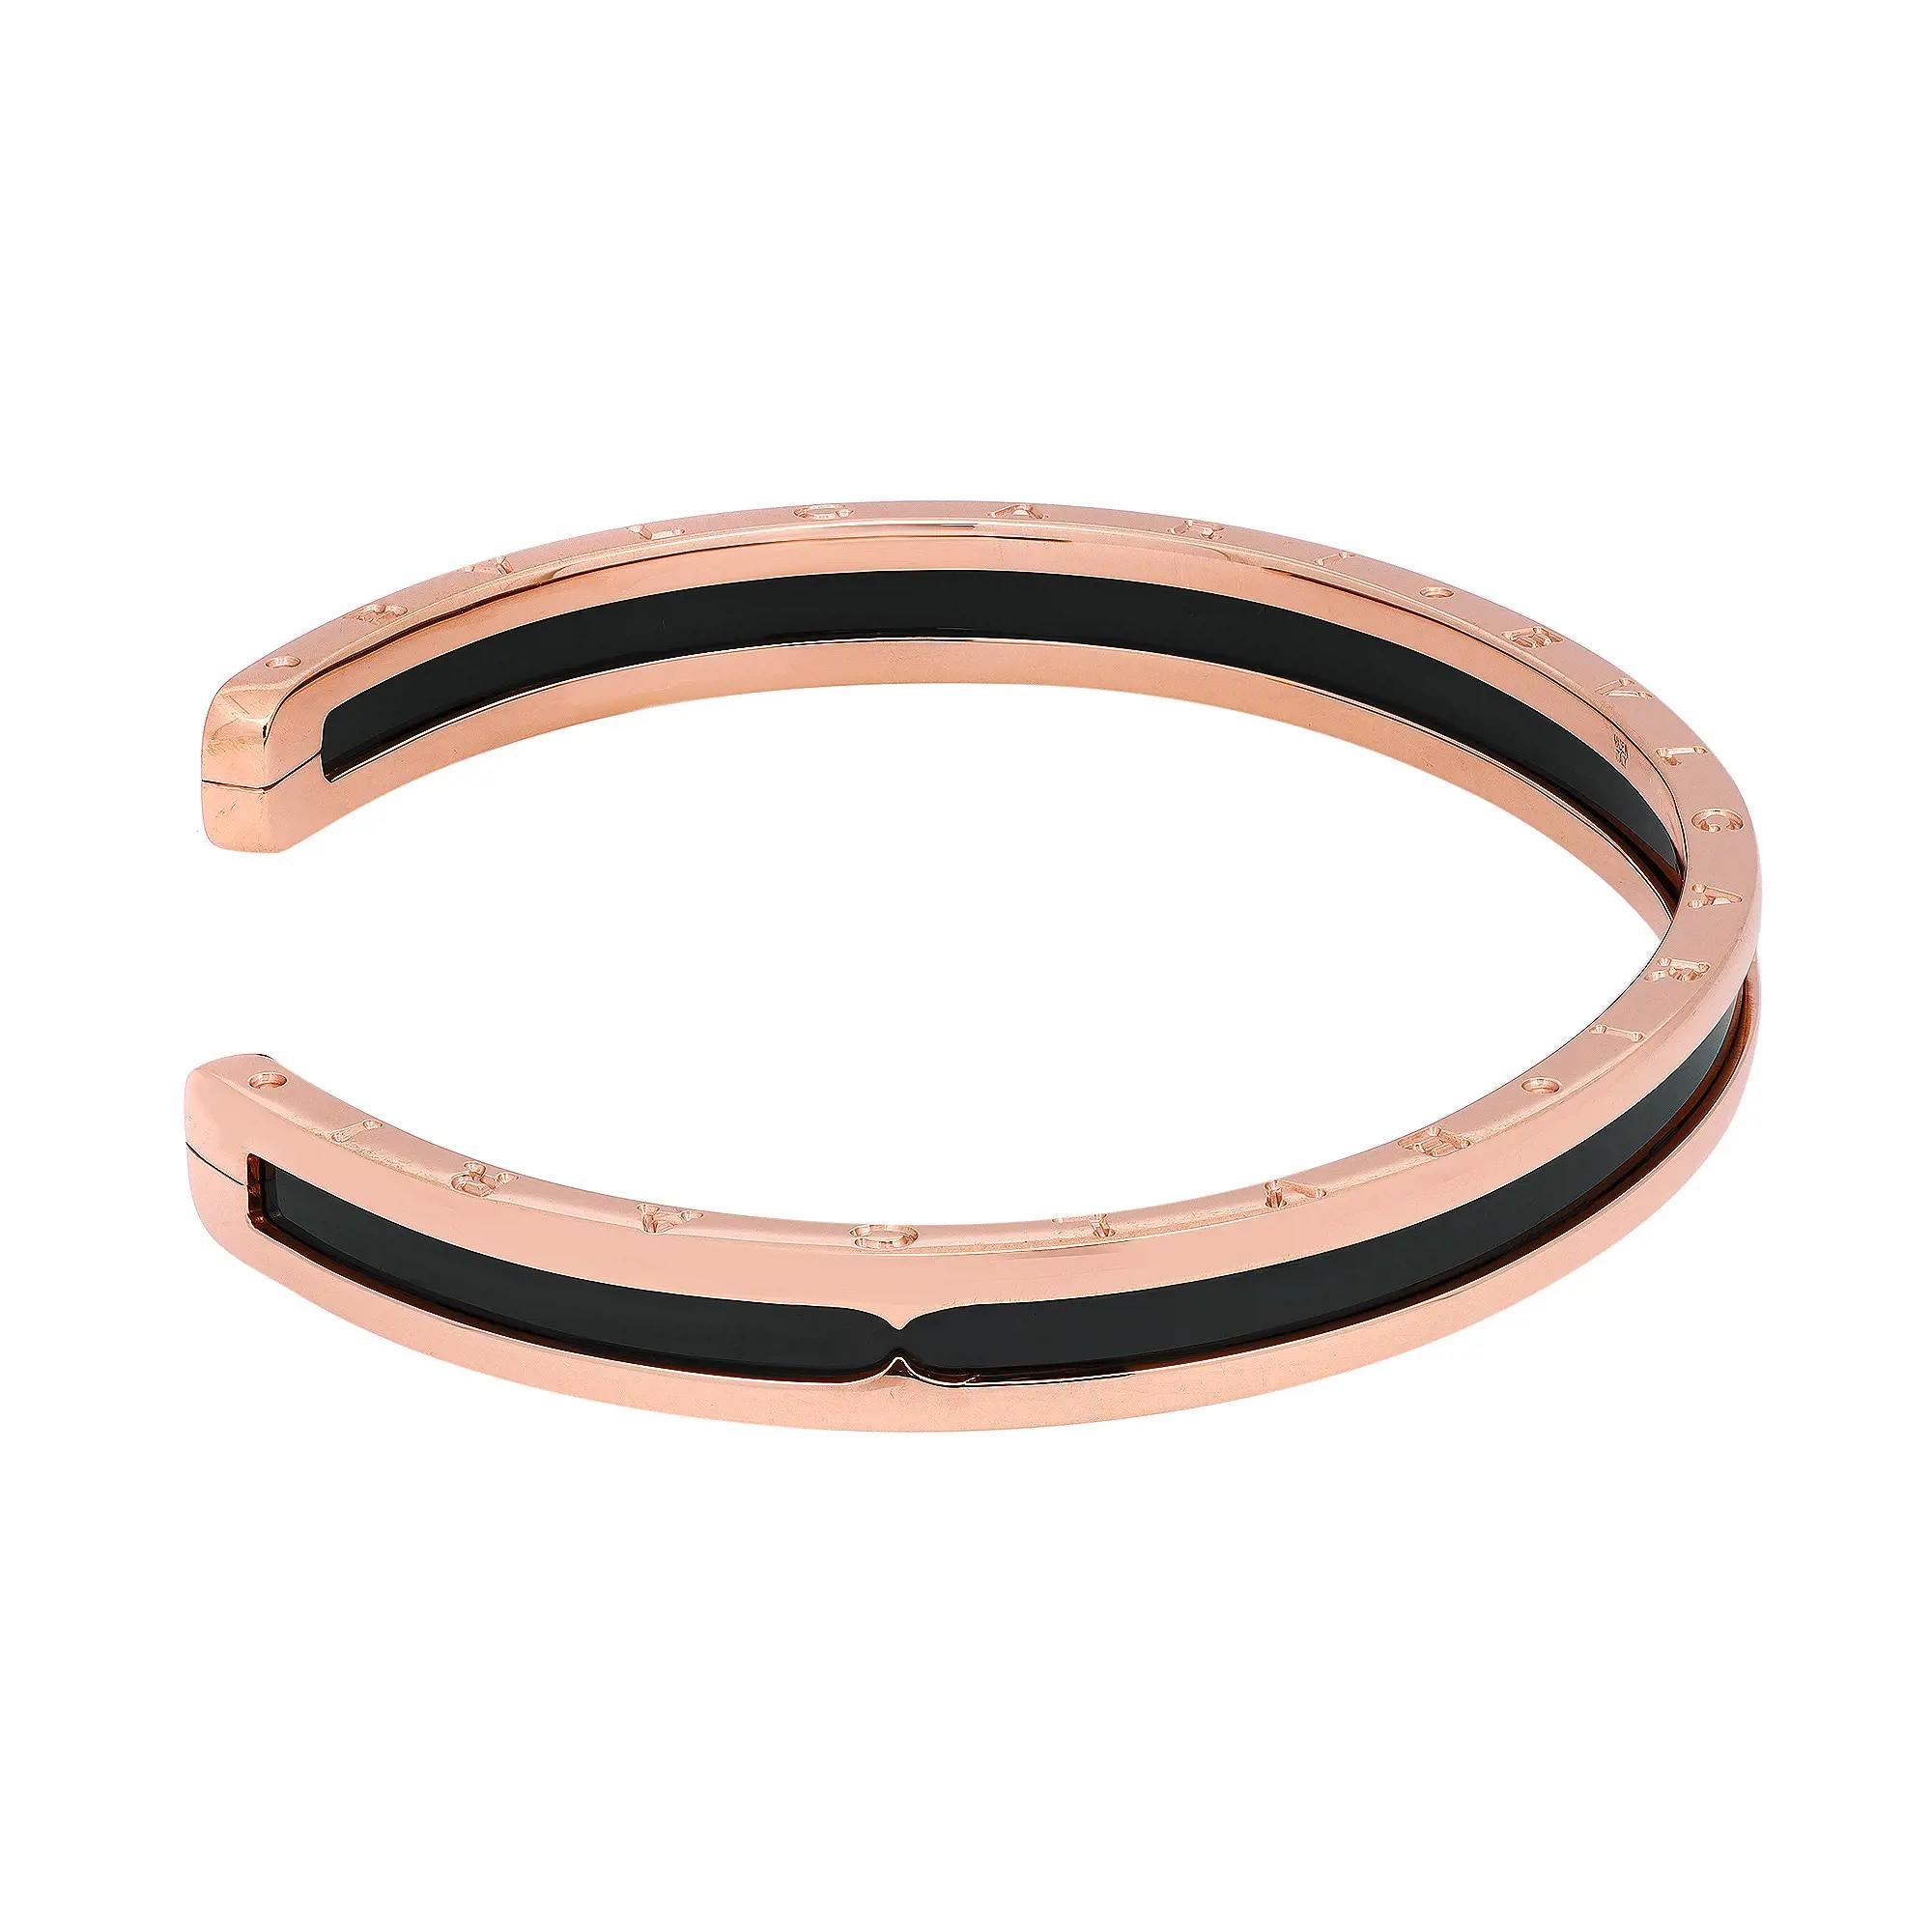 This stunning B.Zero1 open cuff bracelet comes from the house of Bvlgari. Well crafted in 18K rose gold and ceramic. This bracelet features black ceramic in the center with rose gold frame. Bvlgari logo engraving on the edges. Size: Medium. Wrist